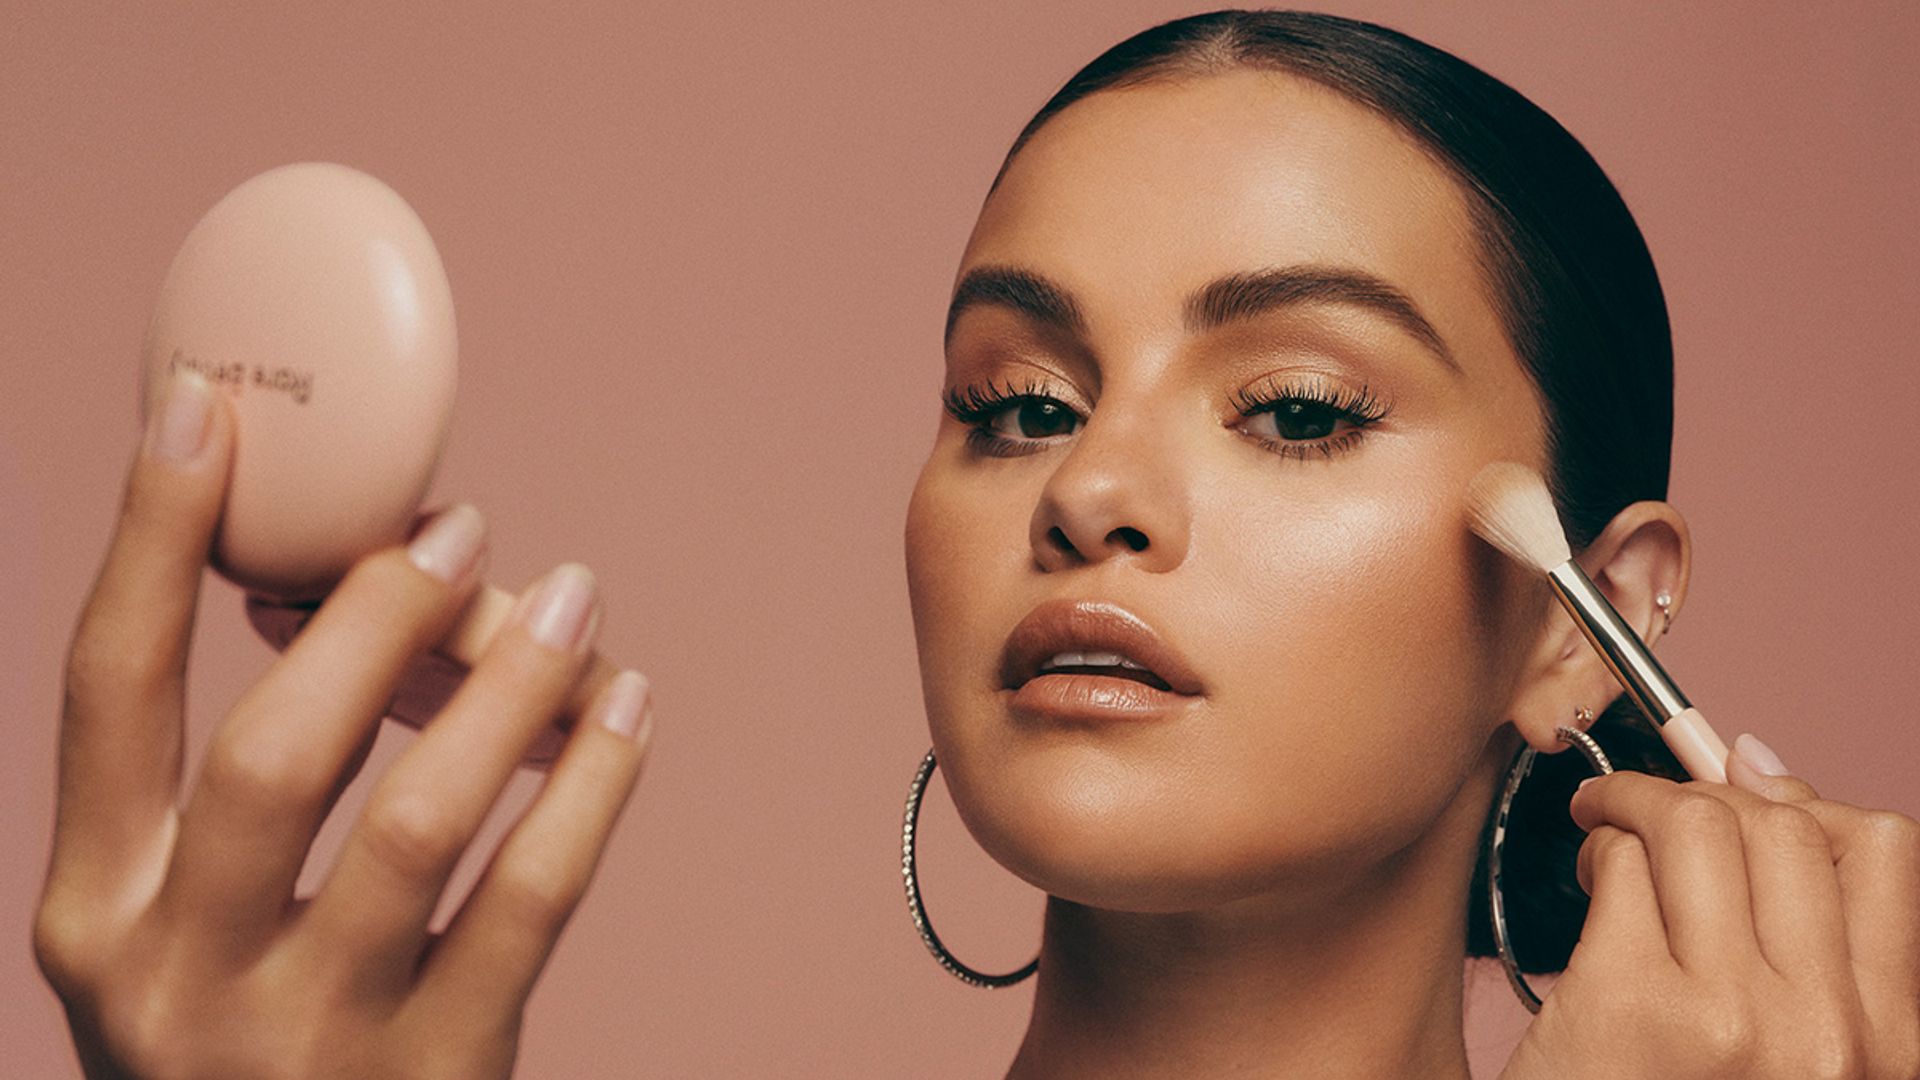 Rare Beauty review: the 5 products from Selena Gomez’s beauty brand that you need in your life